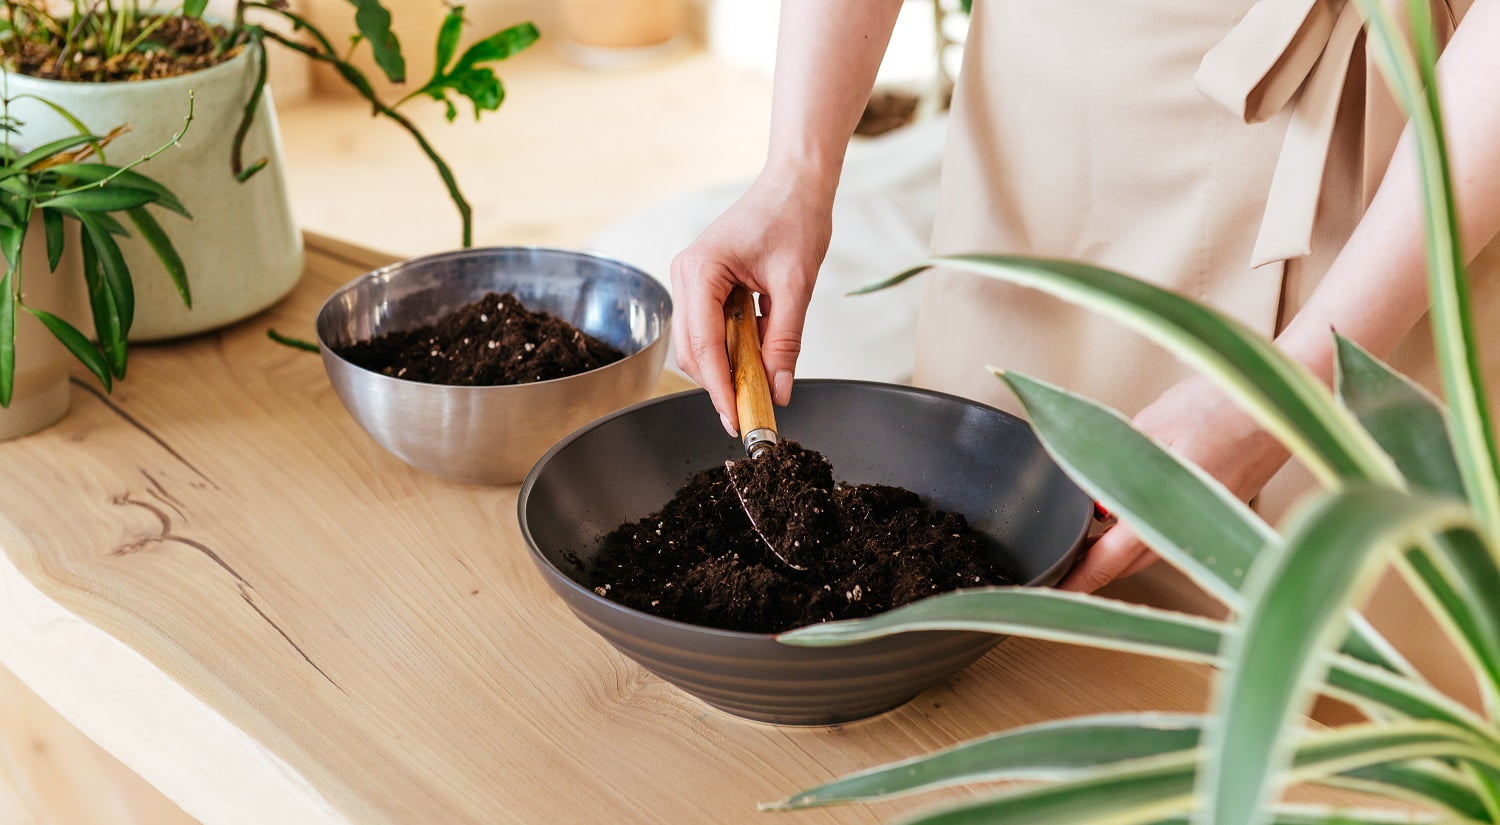 Woman preparing to replant plants indoor. Digging ground in bowl close up